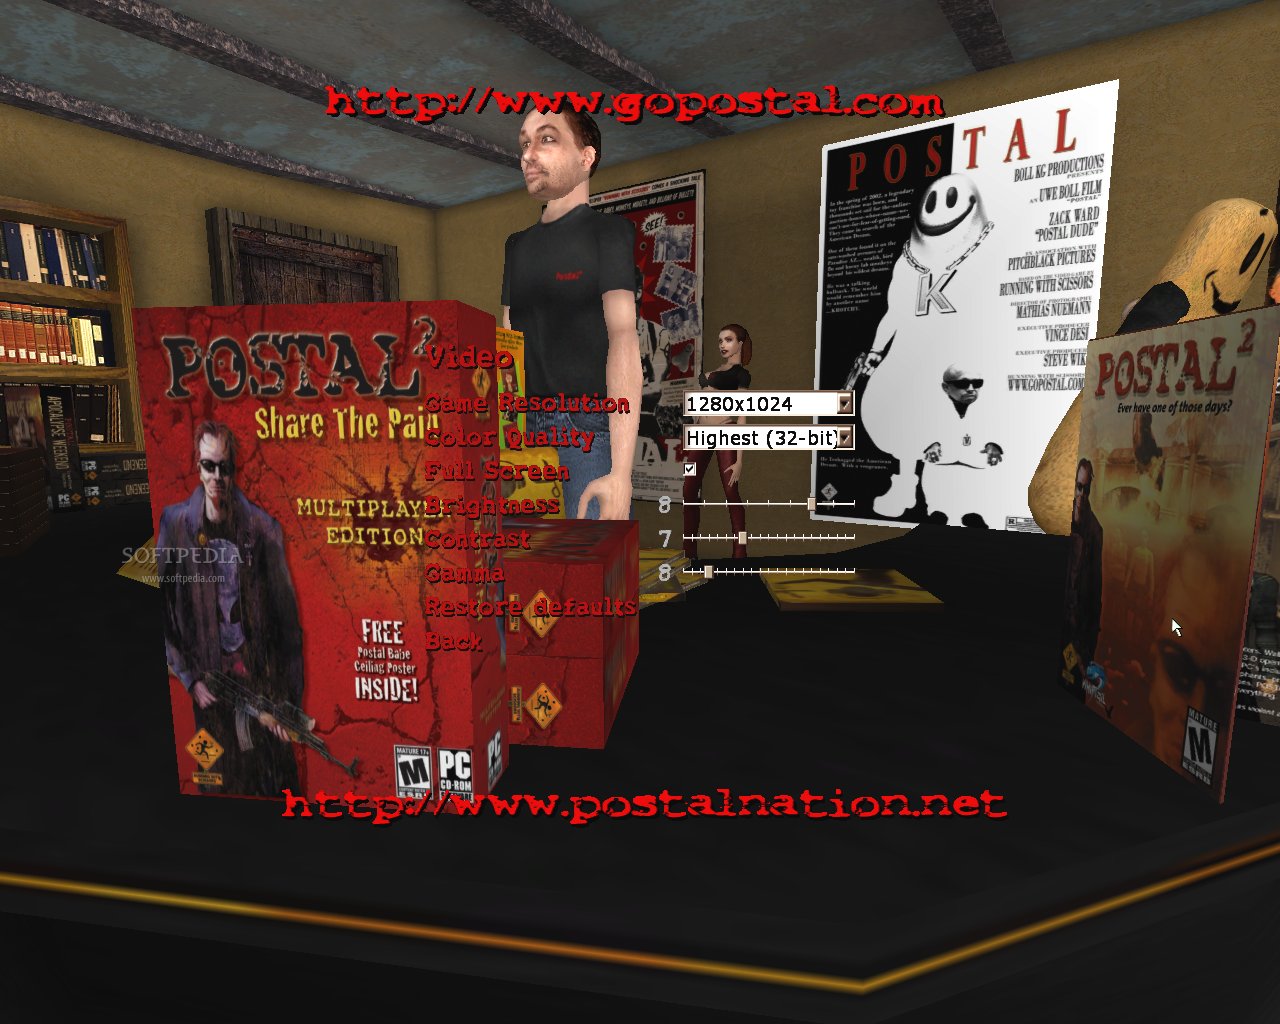 postal 2 share the pain free download single player